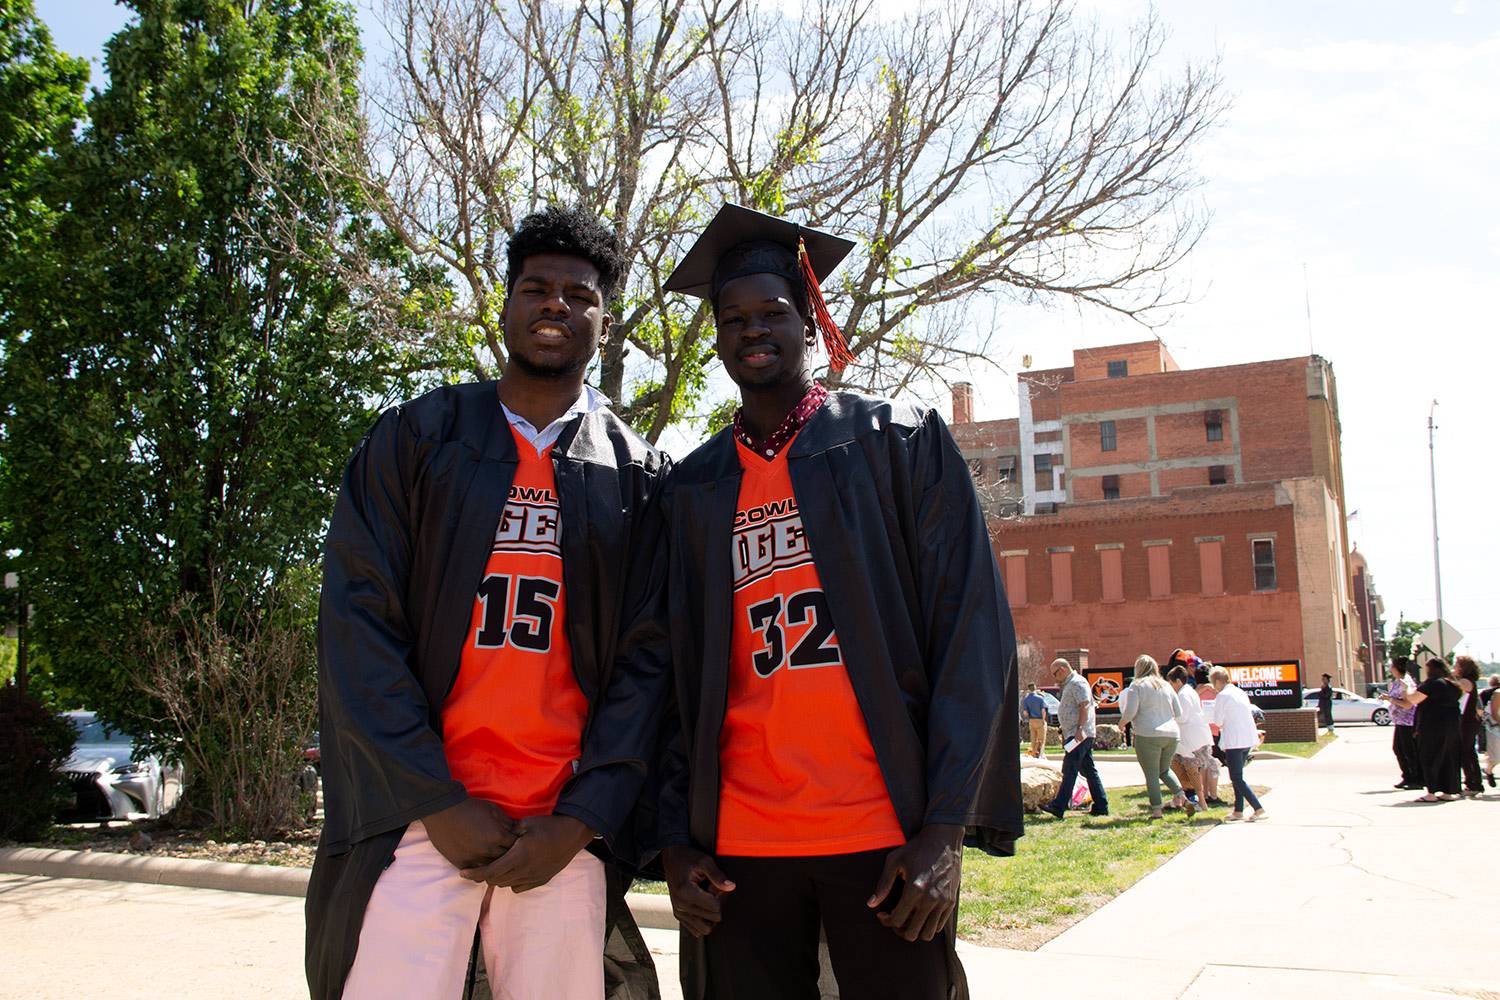 students in basketball jerseys at commencement